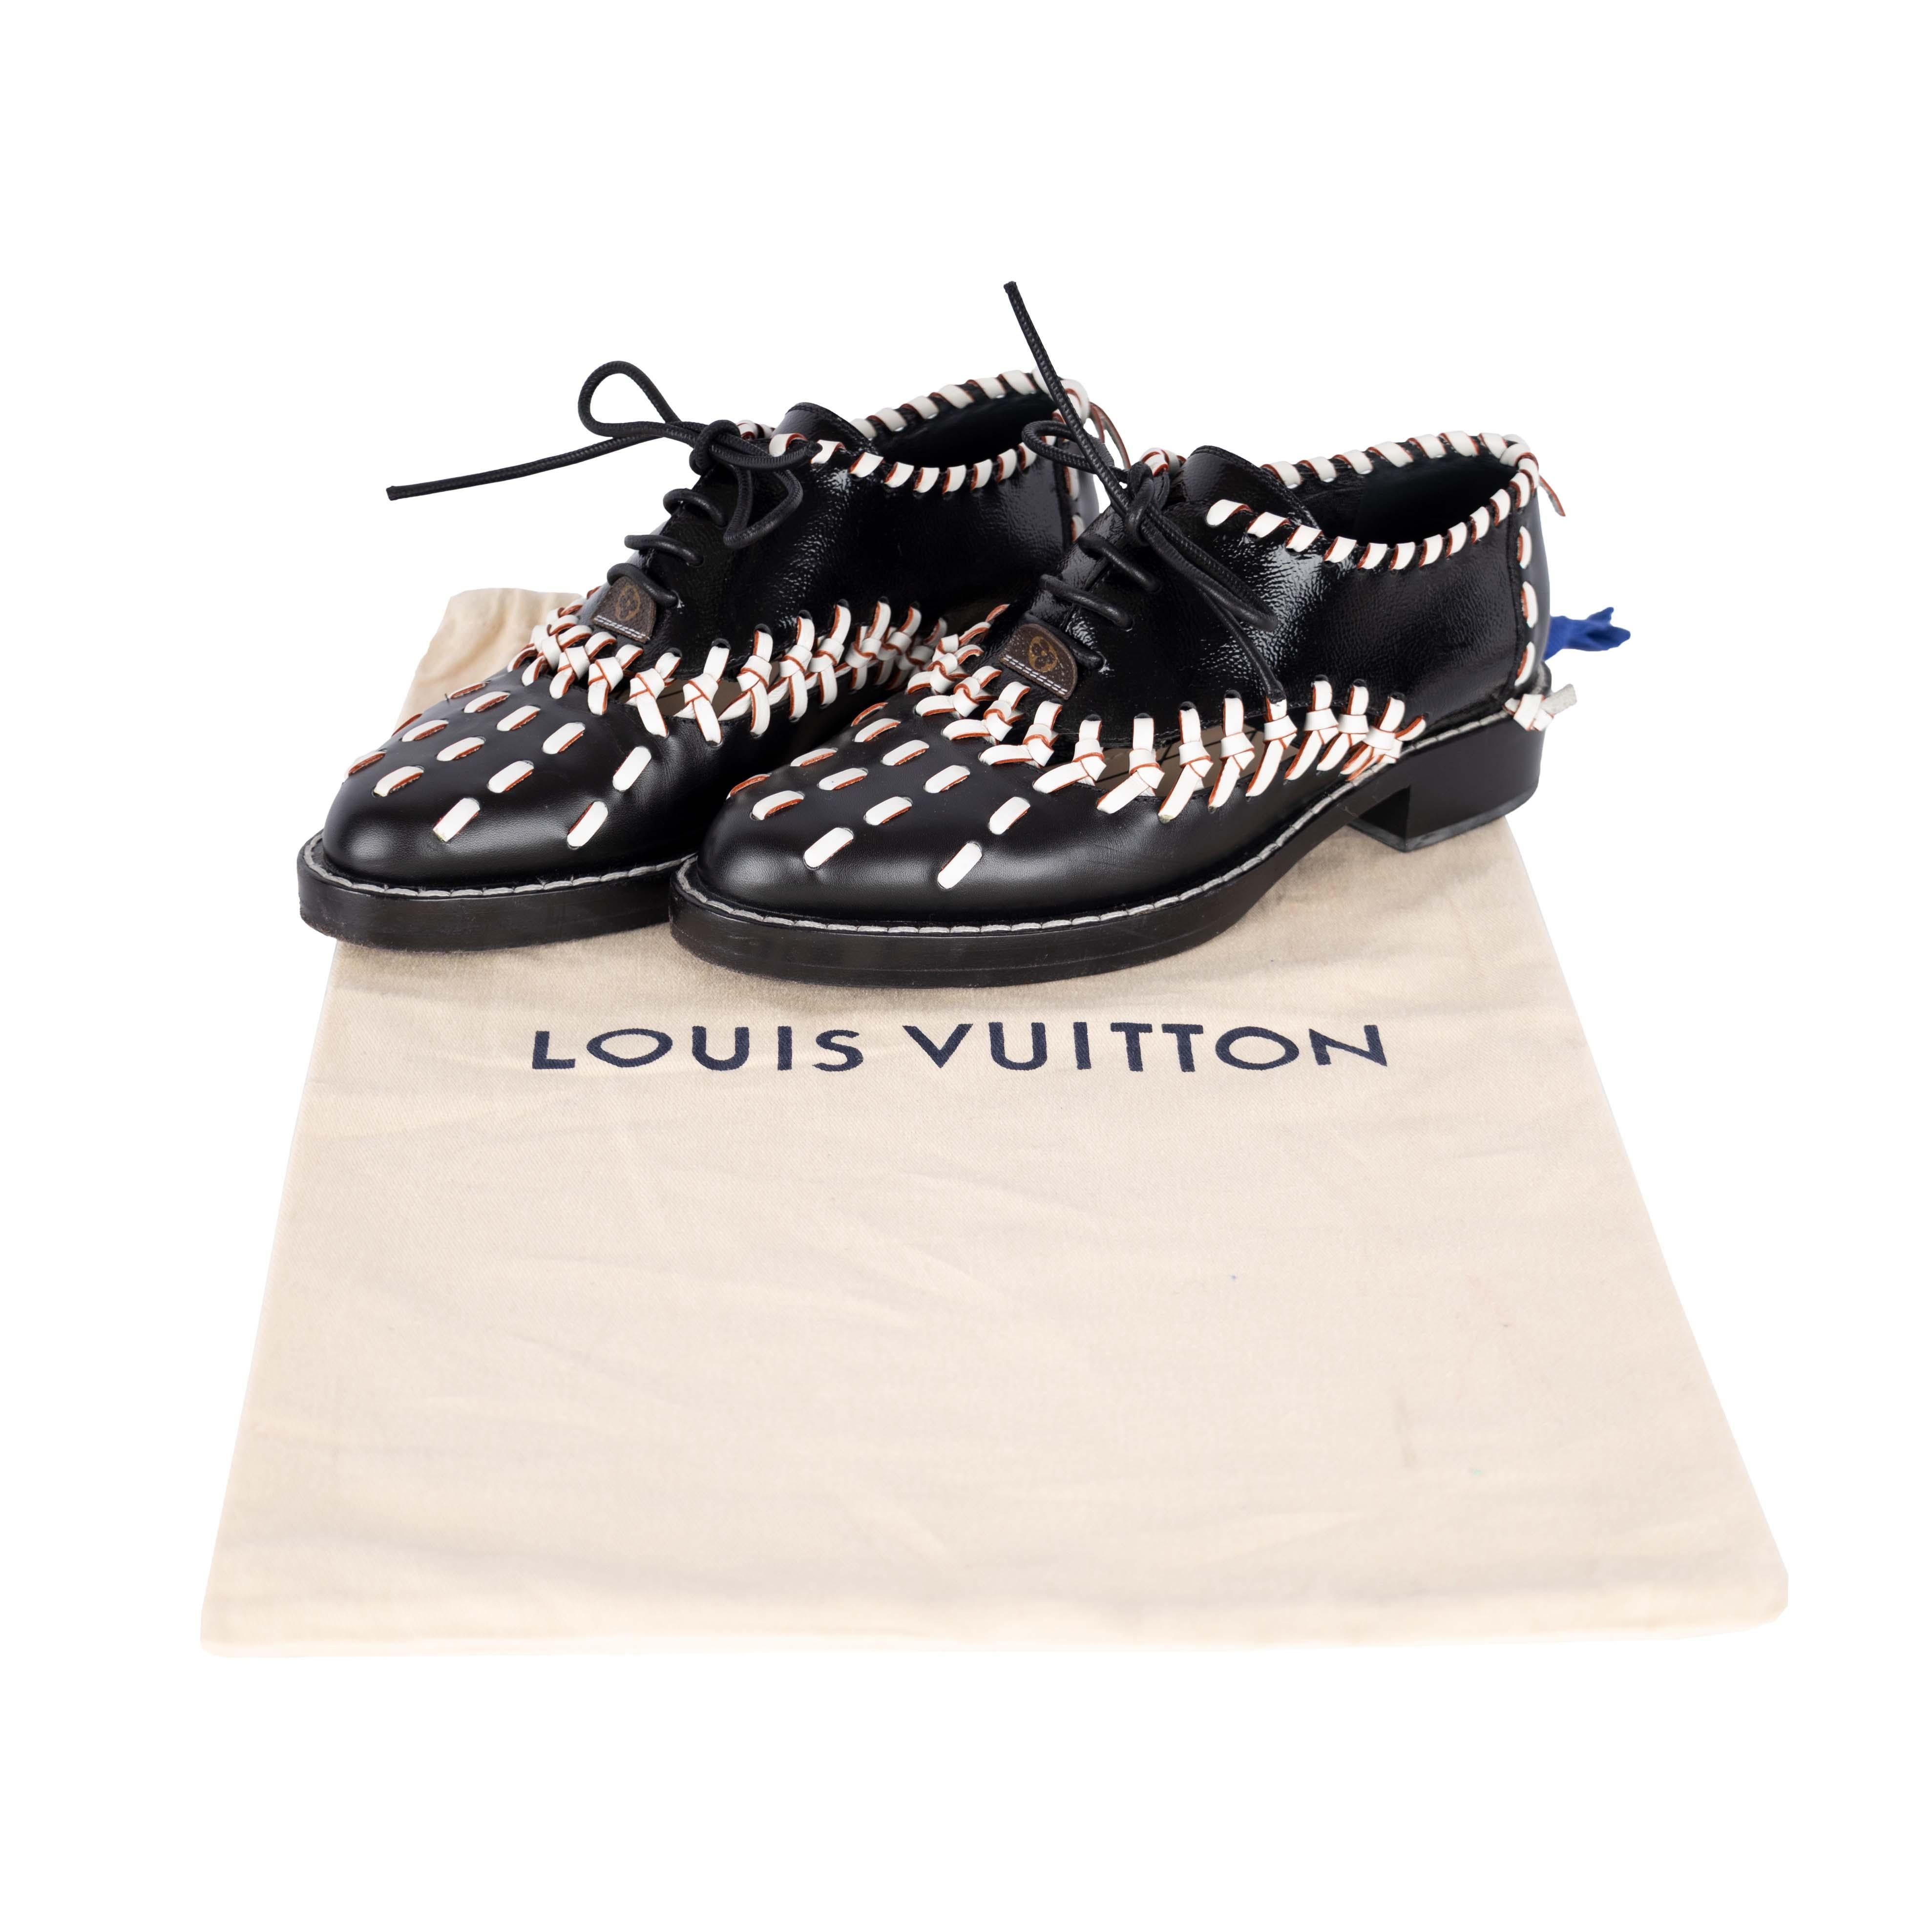 Experience modern femininity and comfort in the Louis Vuitton Manga Braided Oxford Shoes. Crafted by Nicolas Ghesquière, these oxford-styled lace up shoes feature a braided detail in white and red, round toe, and lace-up front closure. The leather